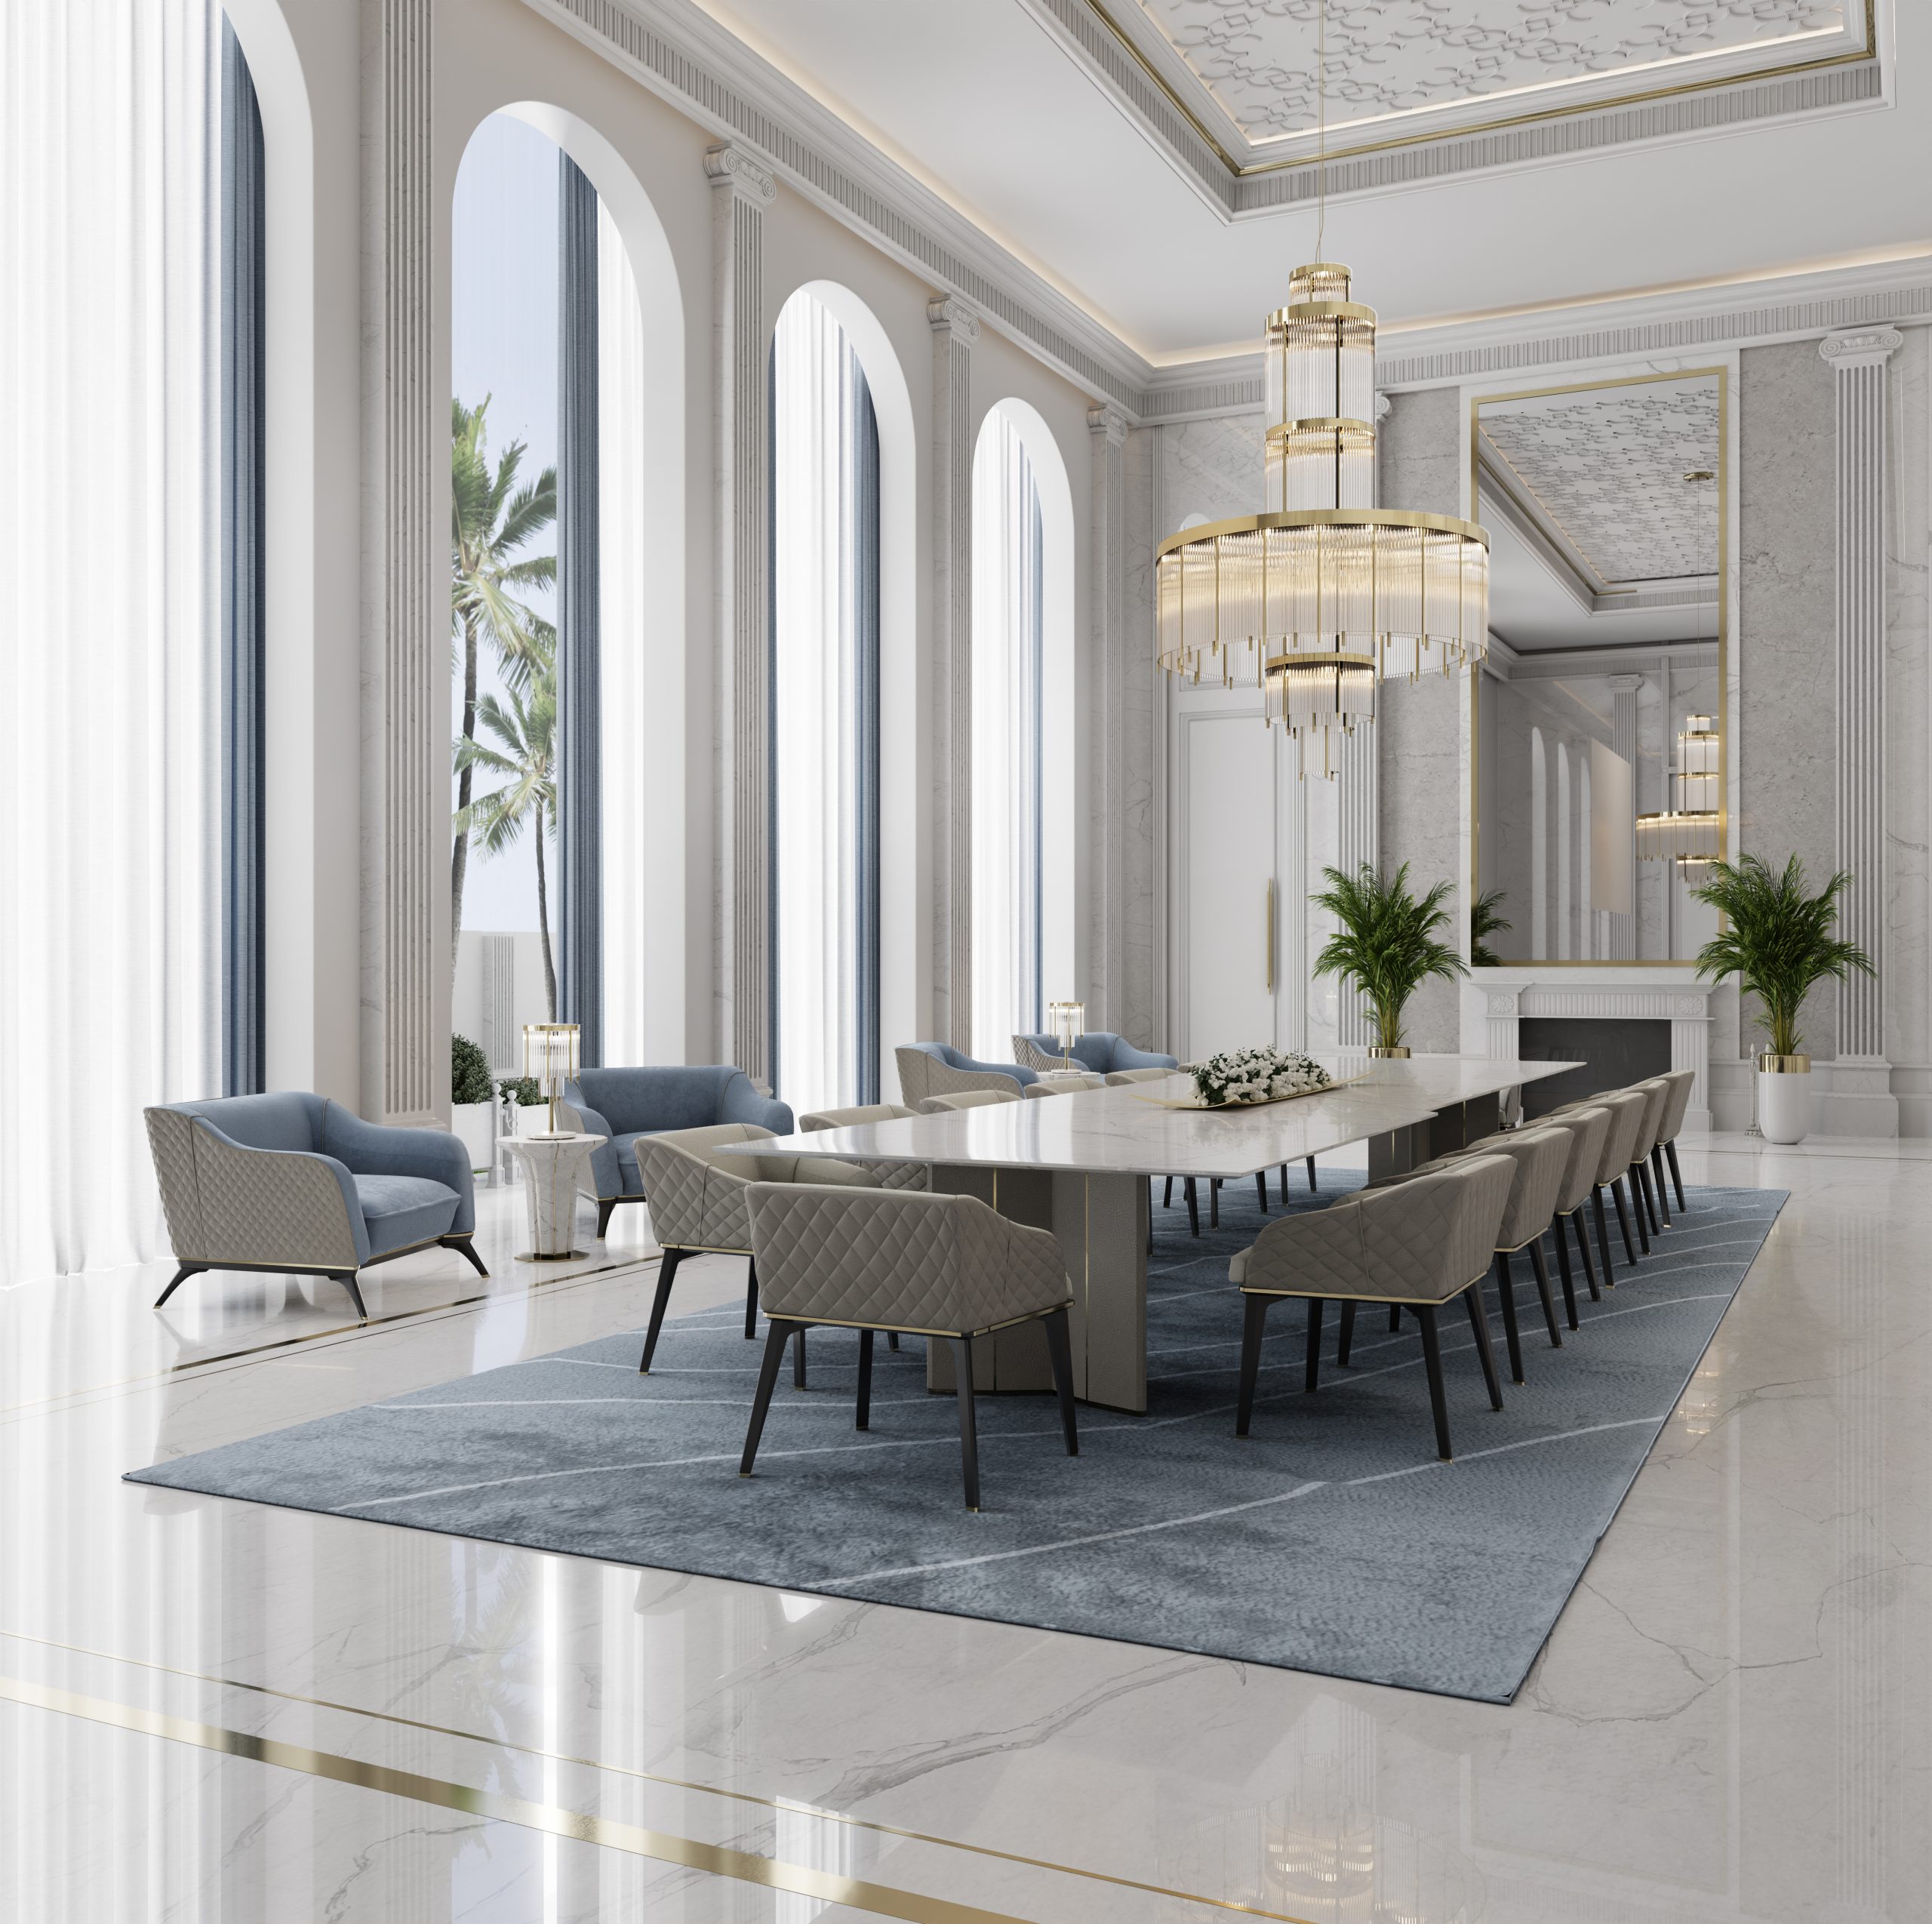 Dining Room Design Filled With Opulent Beauty Within A Meraki Palace